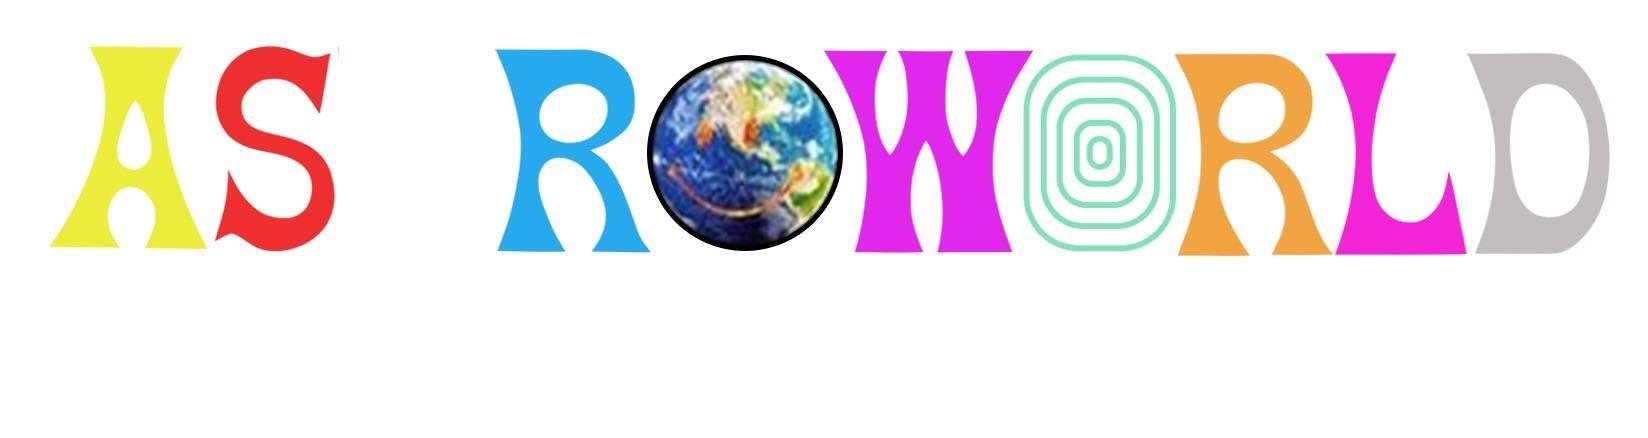 Astroworld Logo - For the person who requested the Astroworld logo png